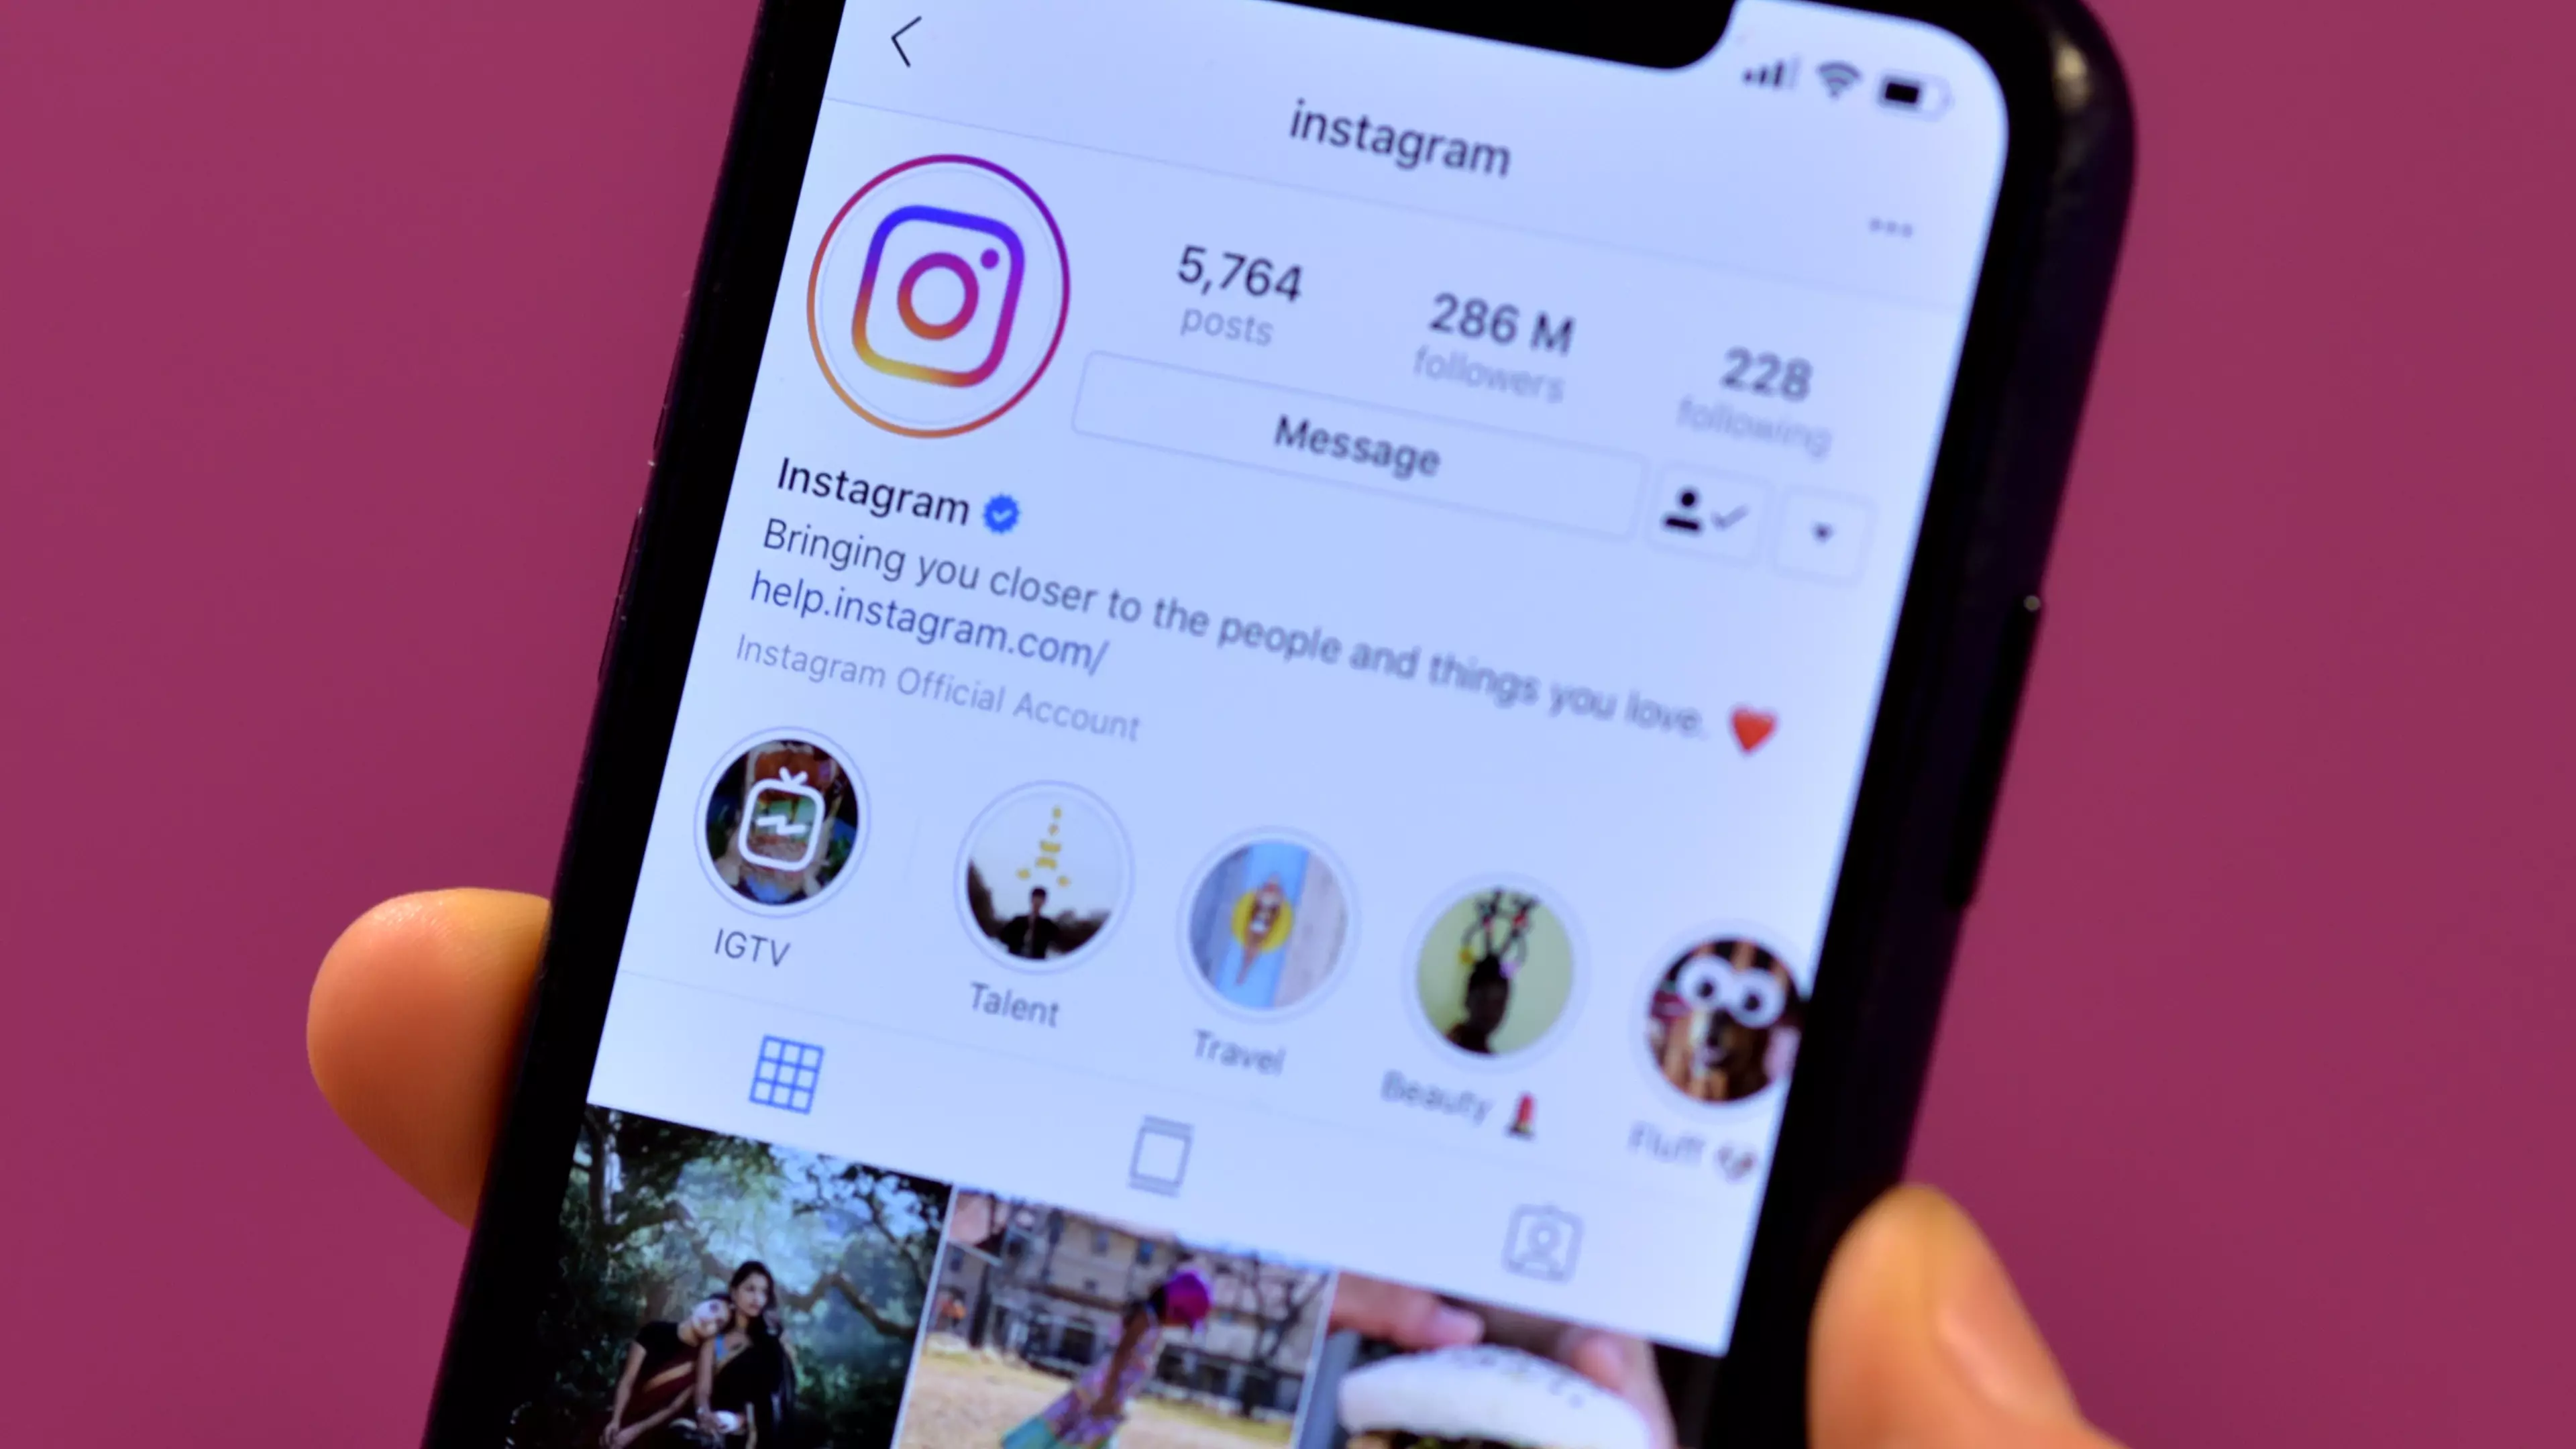 Aussie Influencers Are Already Complaining About Instagram's Decision To Remove Likes